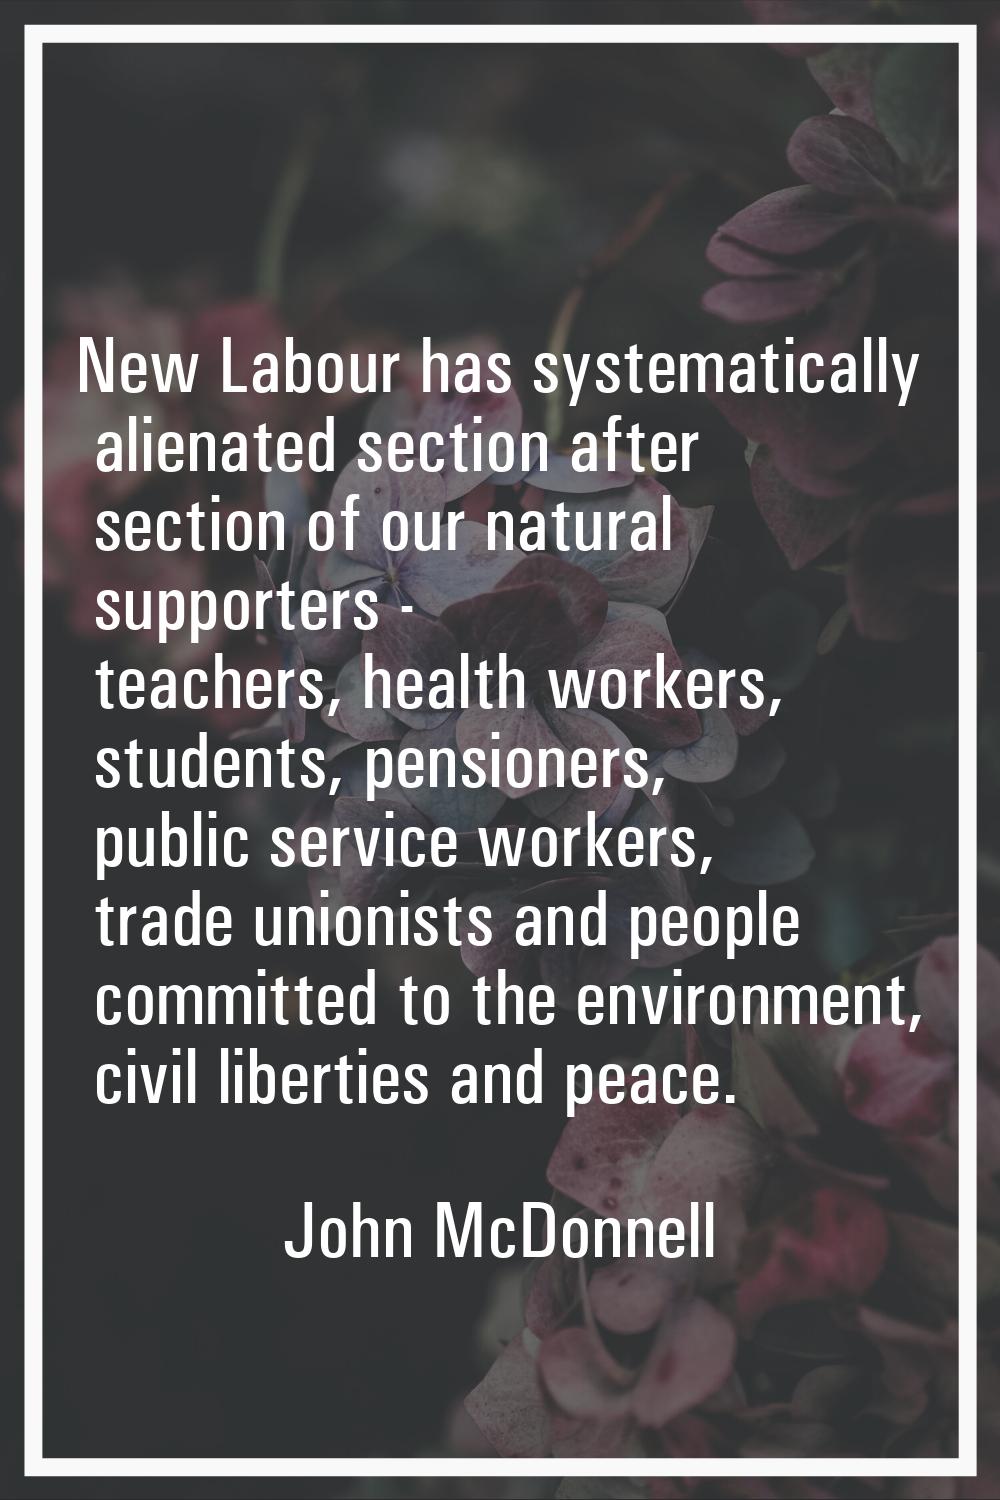 New Labour has systematically alienated section after section of our natural supporters - teachers,